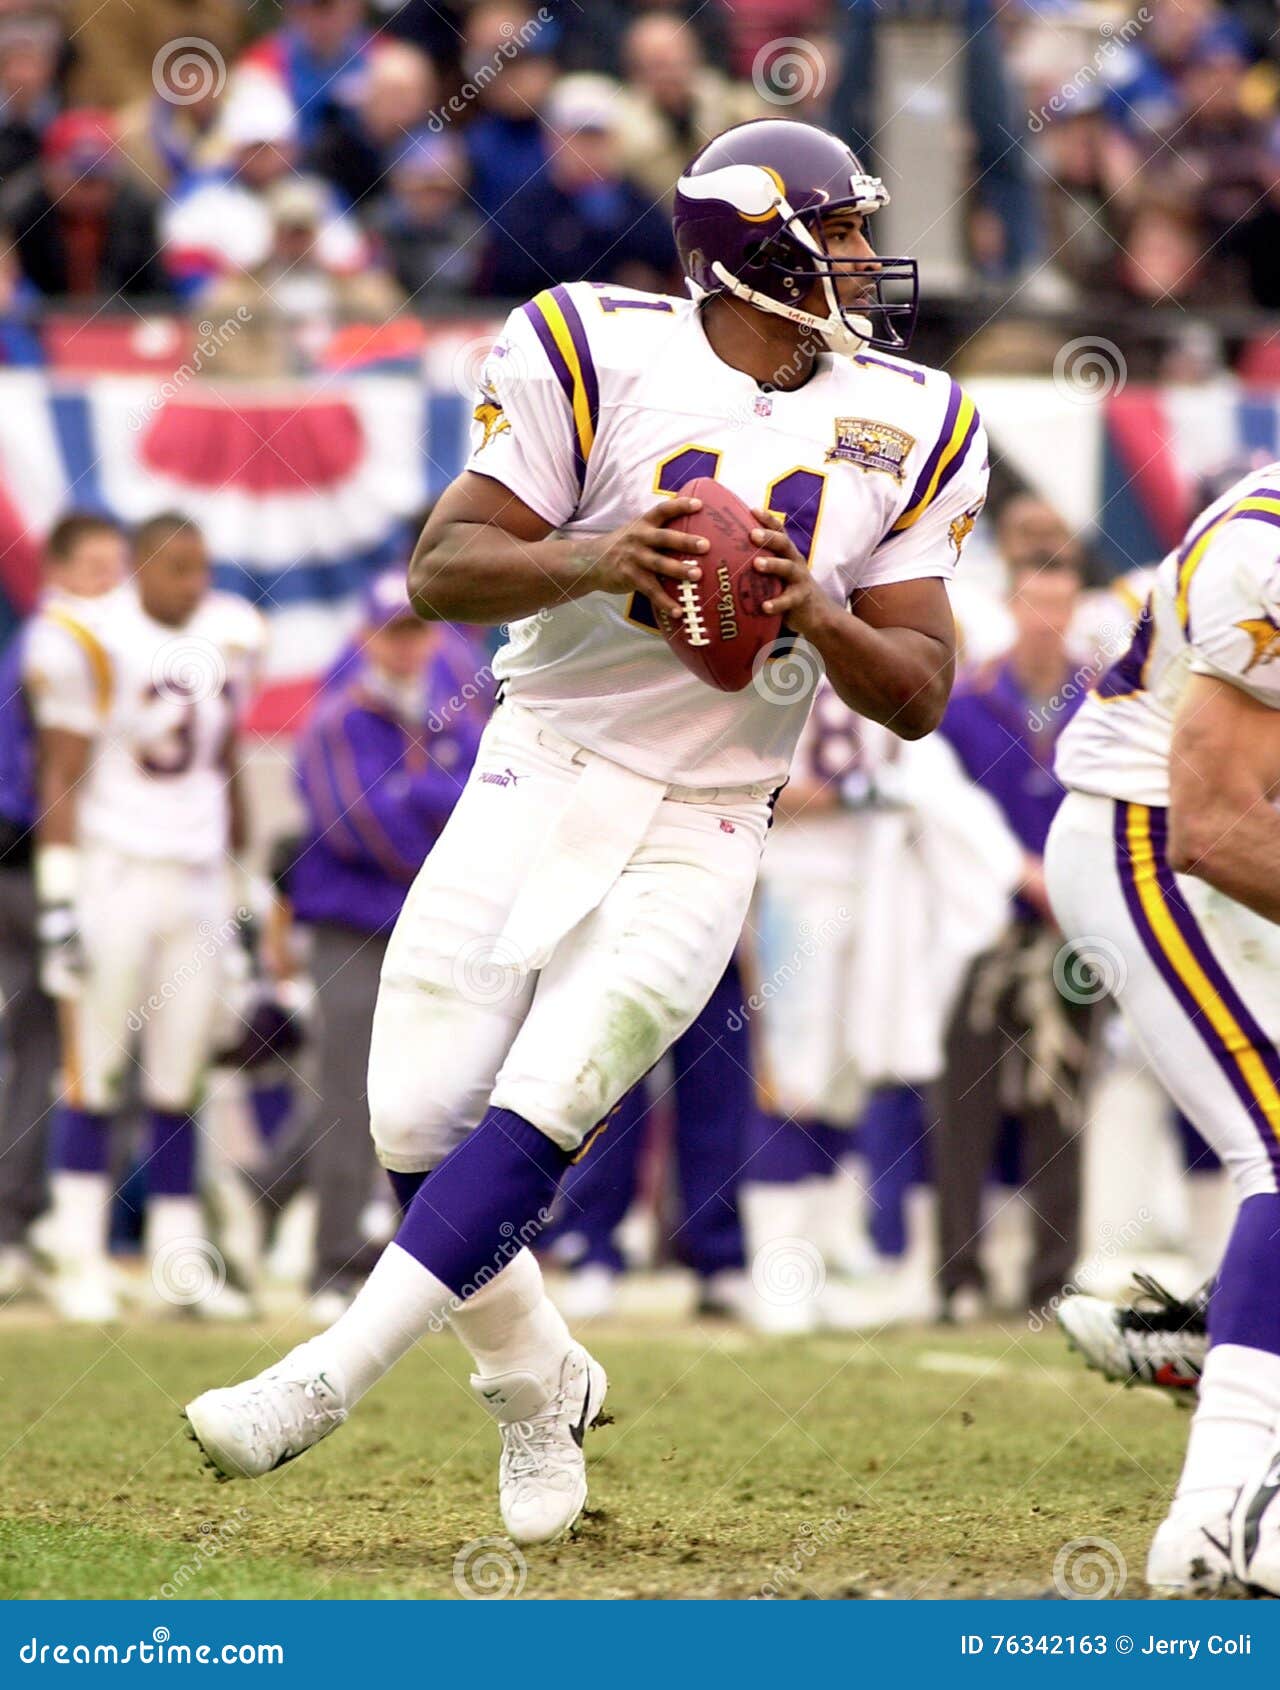 Quarterback Daunte Culpepper of the Minnesota Vikings in game action at the National Football League Championship game. The New York Giants went on to defeat the Minnesota Vikings in the NFC Championship by a score of 41 to 0 on 01/14/01.